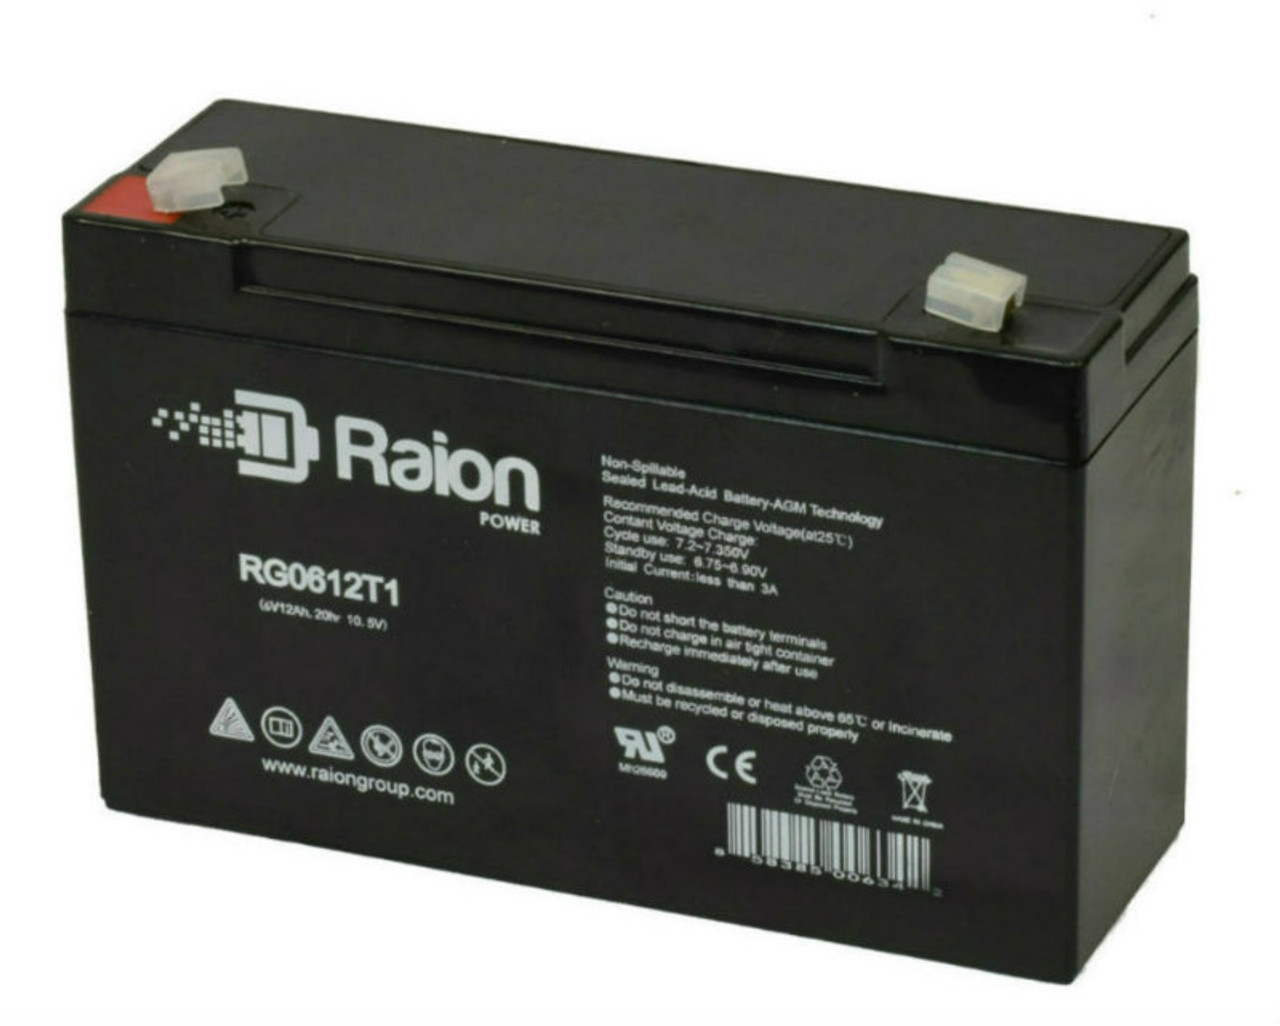 Raion Power RG06120T1 Replacement 6V 12Ah Emergency Light Battery for Chloride 12A74TV2